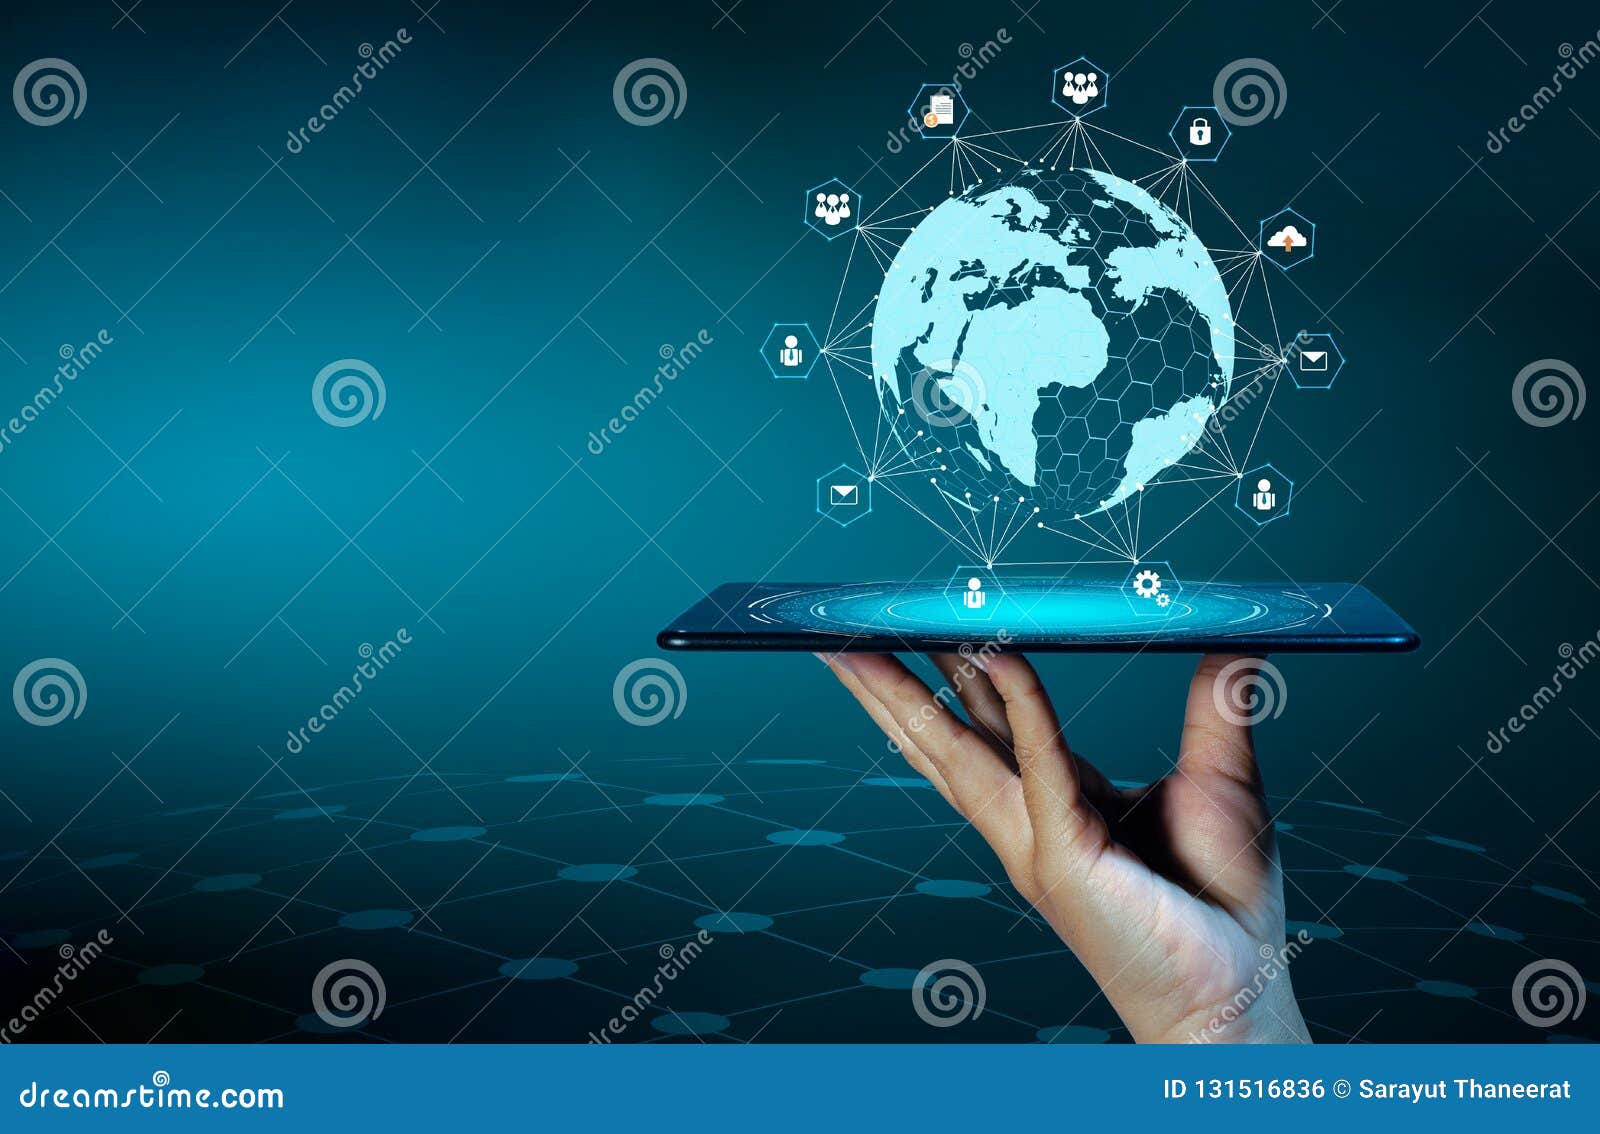 smart phones and globe connections uncommon communication world internet business people press the phone to communicate in the int